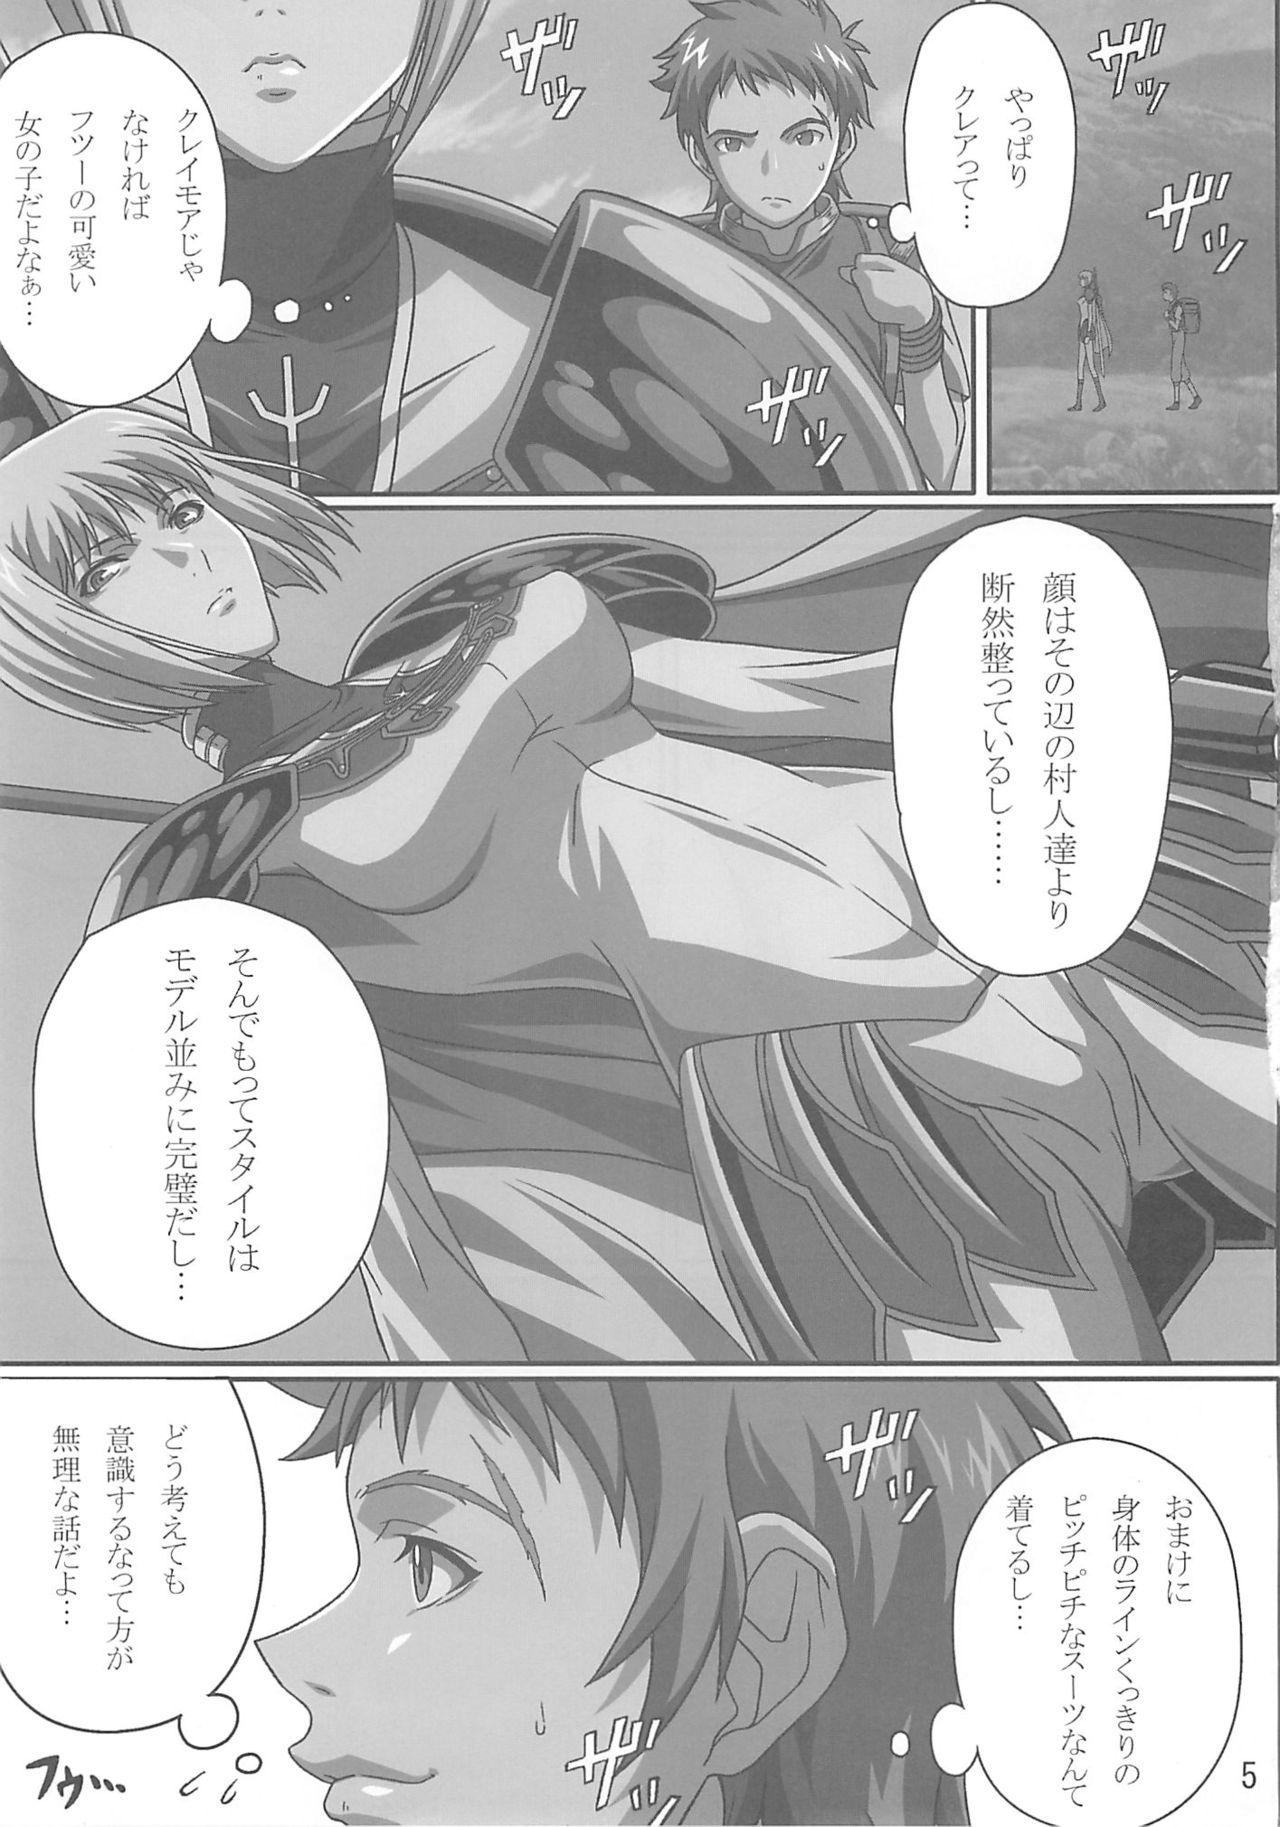 8teen INDUSTRIAL - Claymore Groupfuck - Page 4